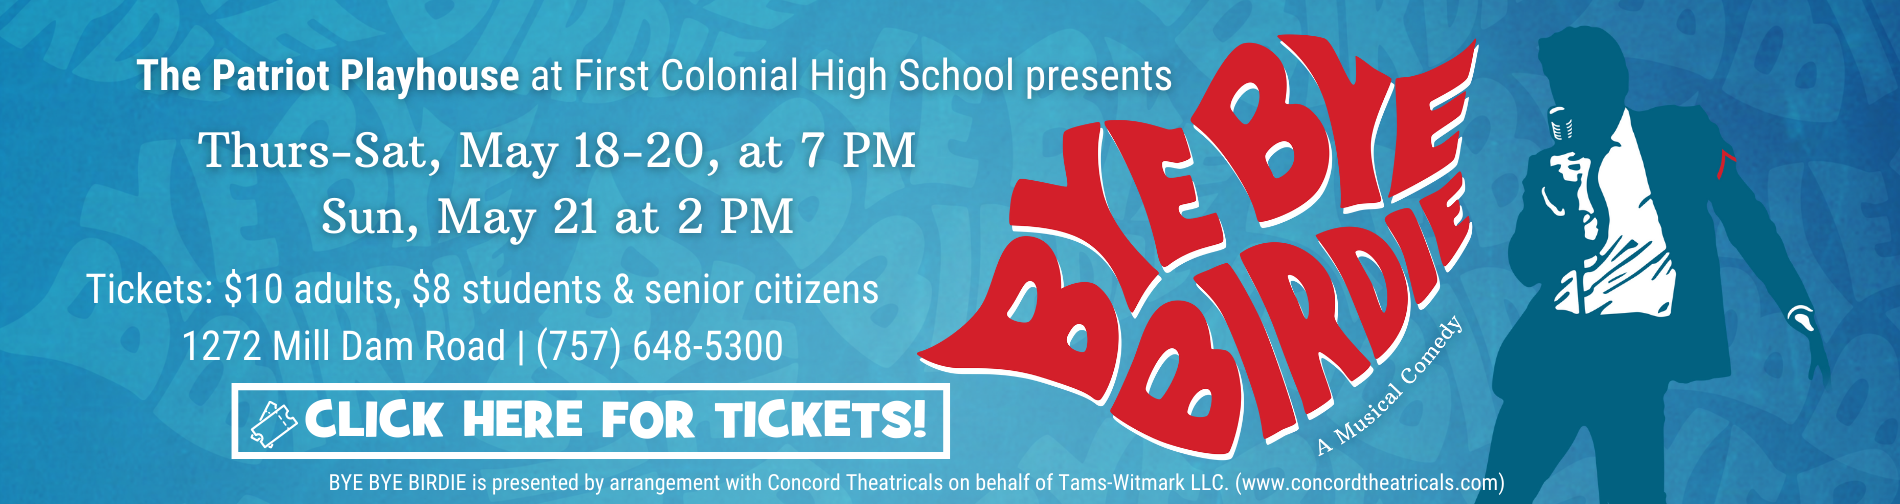 The Patriot Playhouse at First Colonial High School presents the musical BYE BYE BIRDIE Thursday-Saturday, May 18-21! Click the picture to purchase tickets.